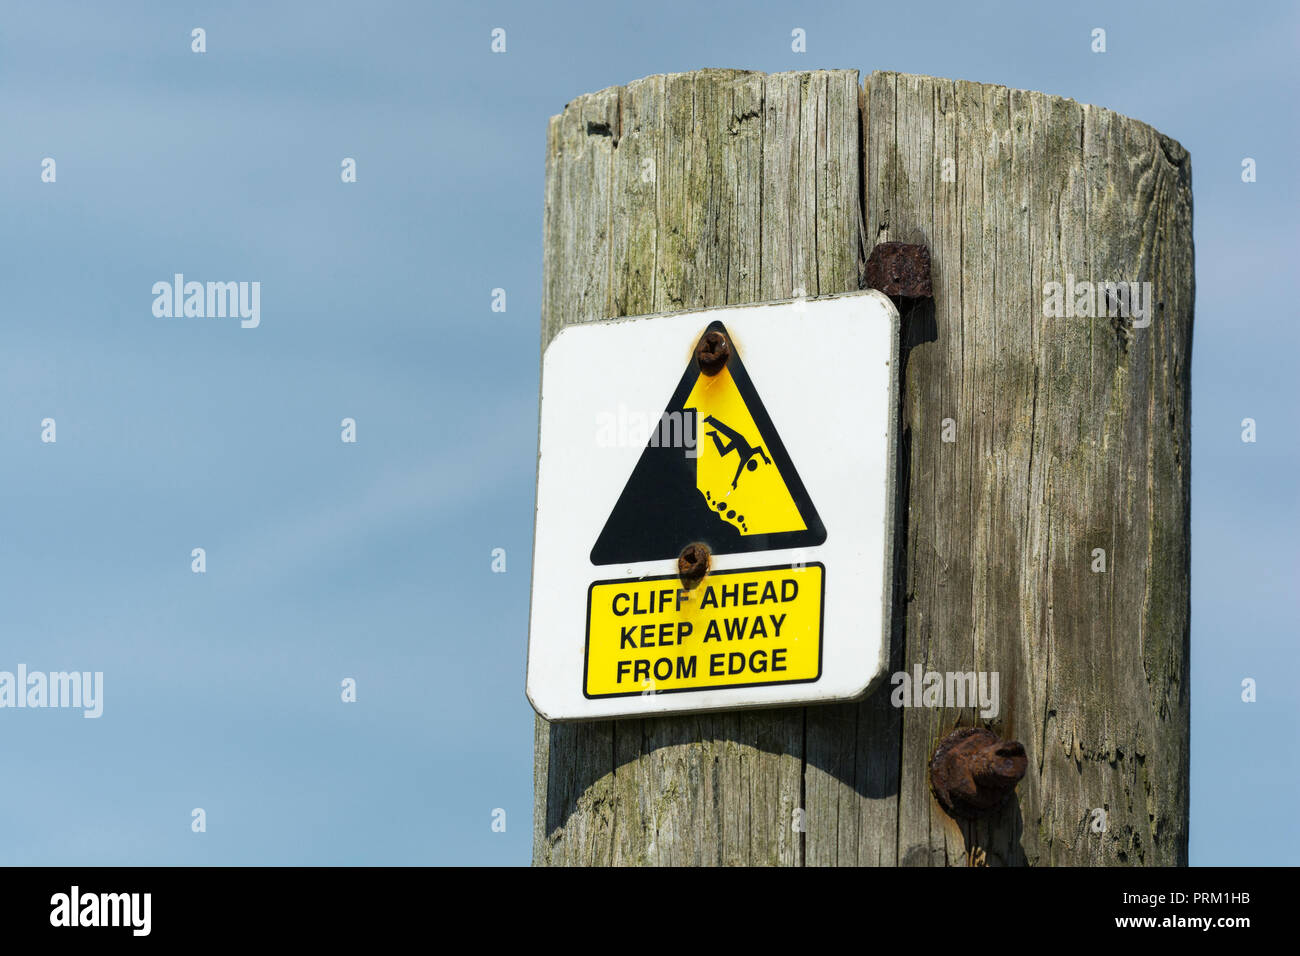 Warning yellow triangle sign highlighting dangerous cliff edge nearby. Keep away from the edge concept, falling off, falling man pictogram. Stock Photo